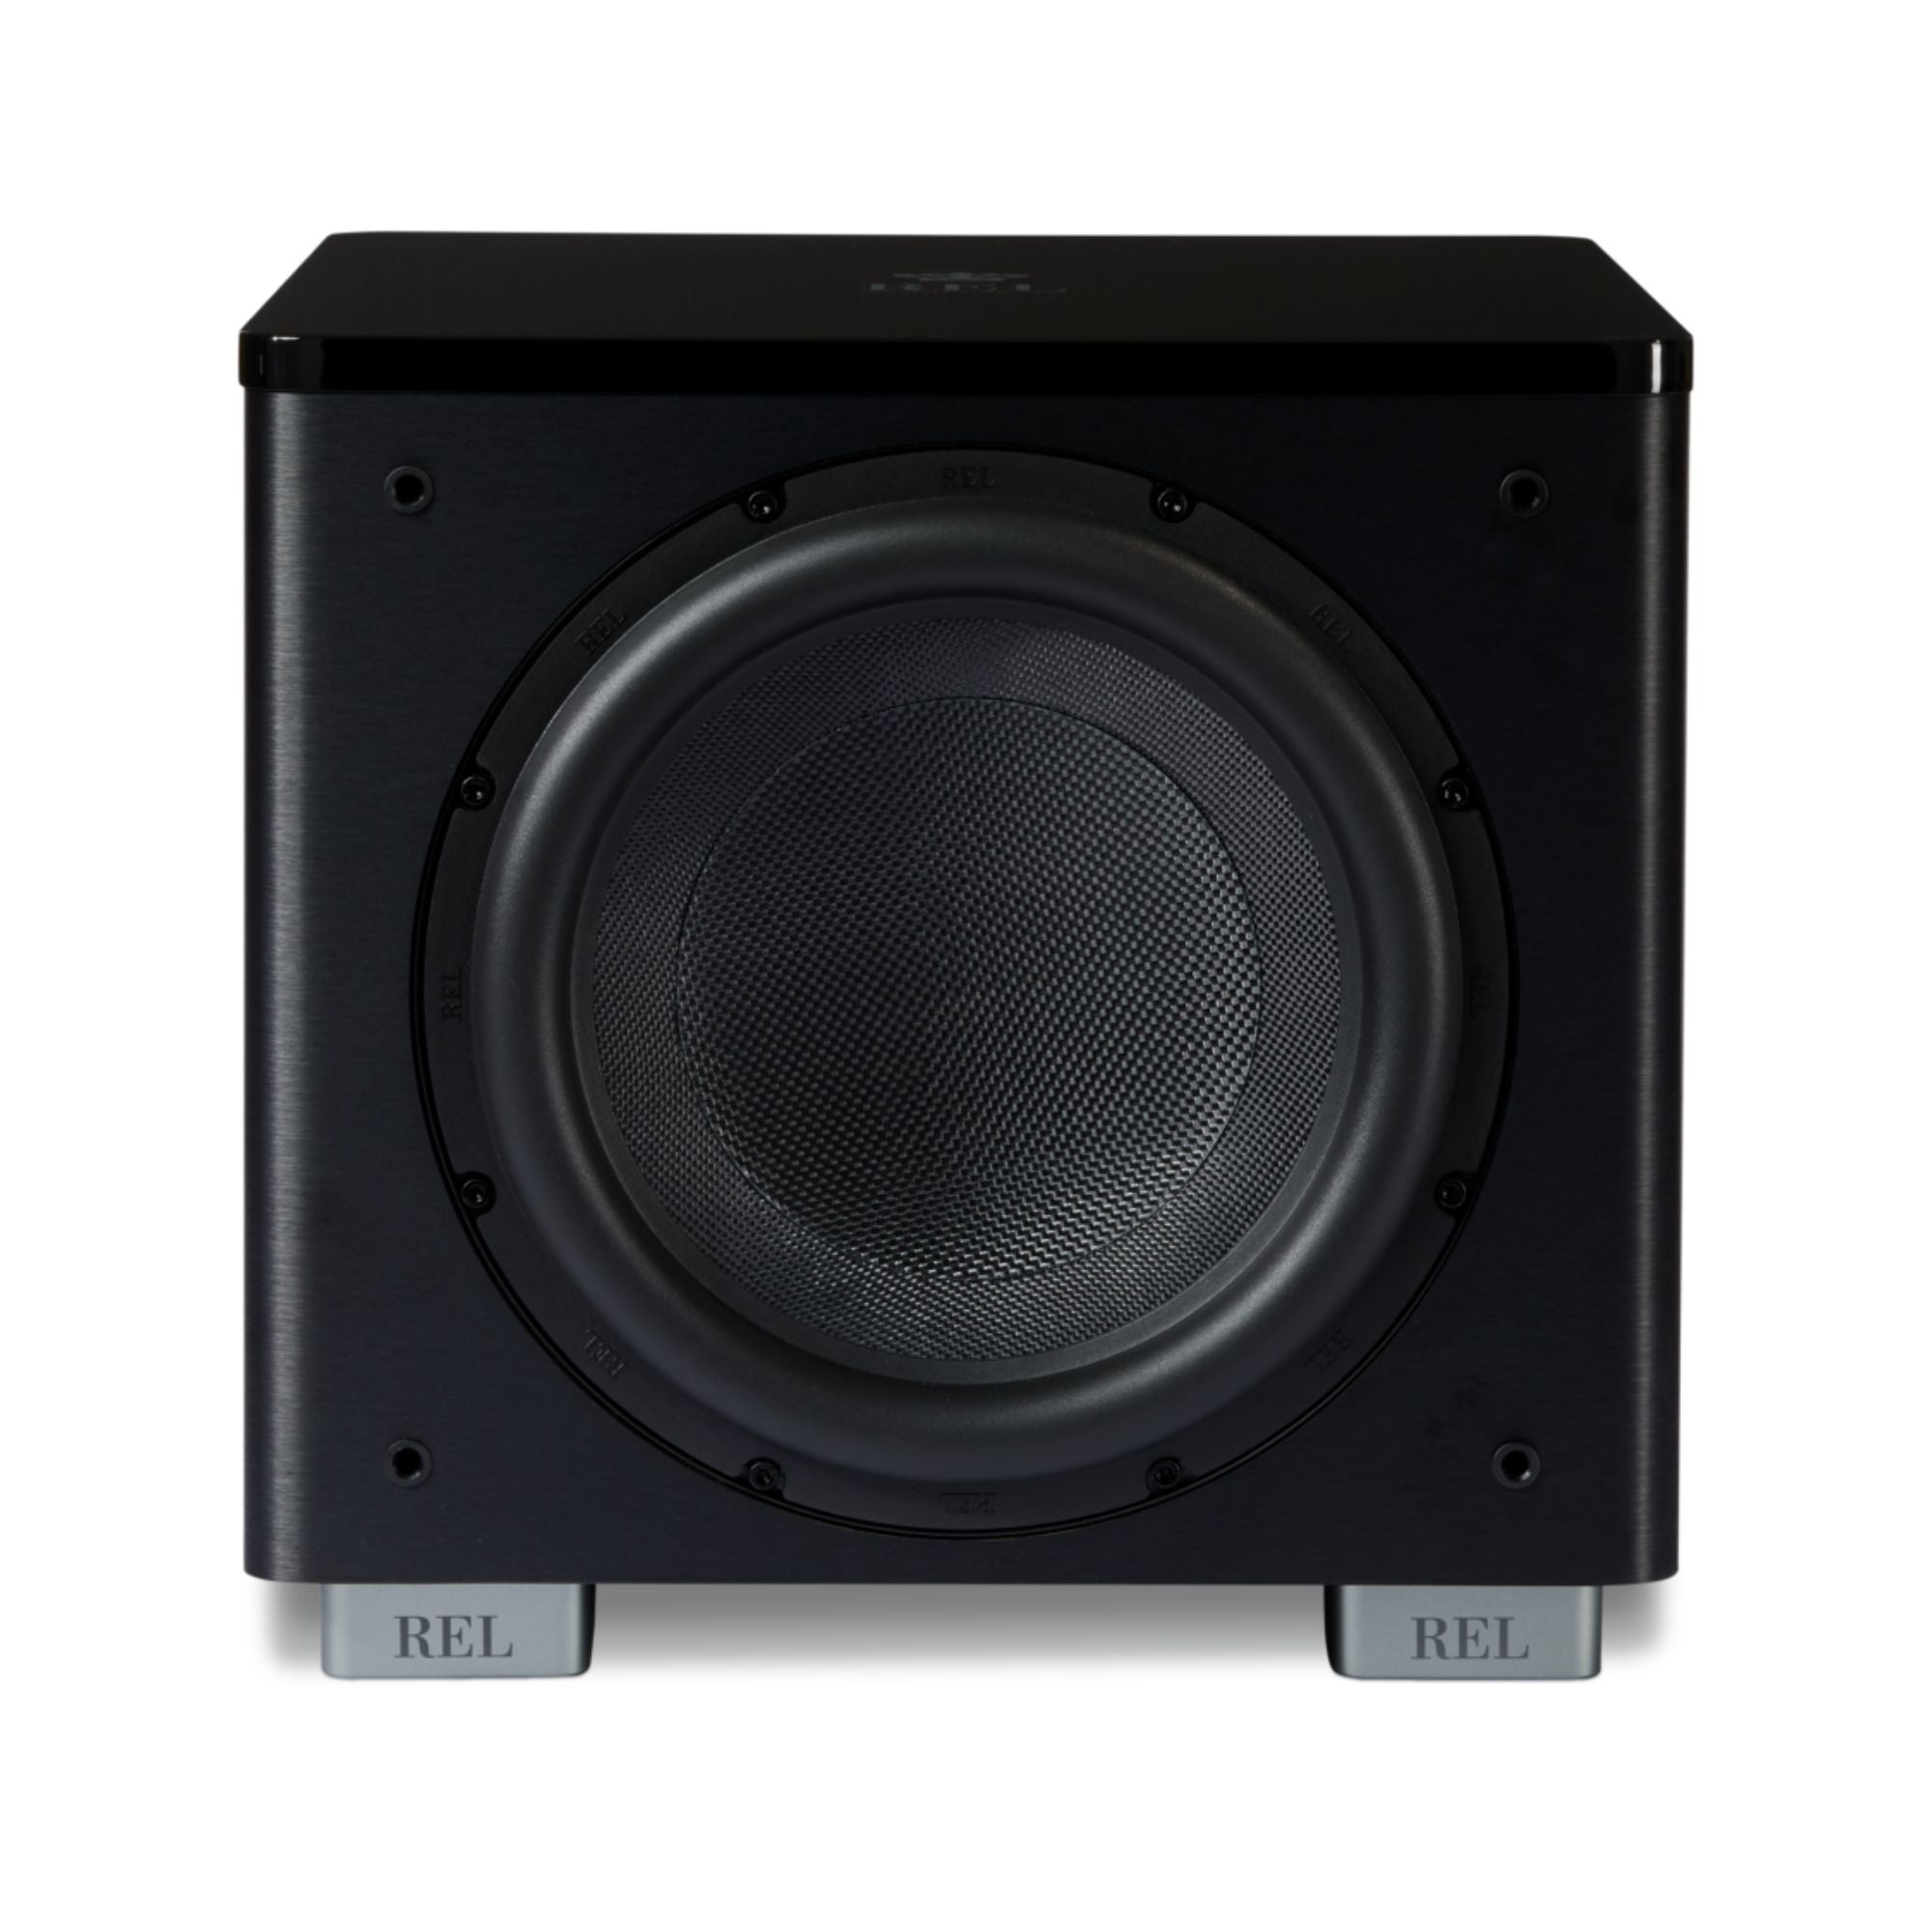 REL Acoustics HT/1205 MKII - 12 Inches Powered Subwoofer, REL Acoustics, Subwoofer - AVStore.in